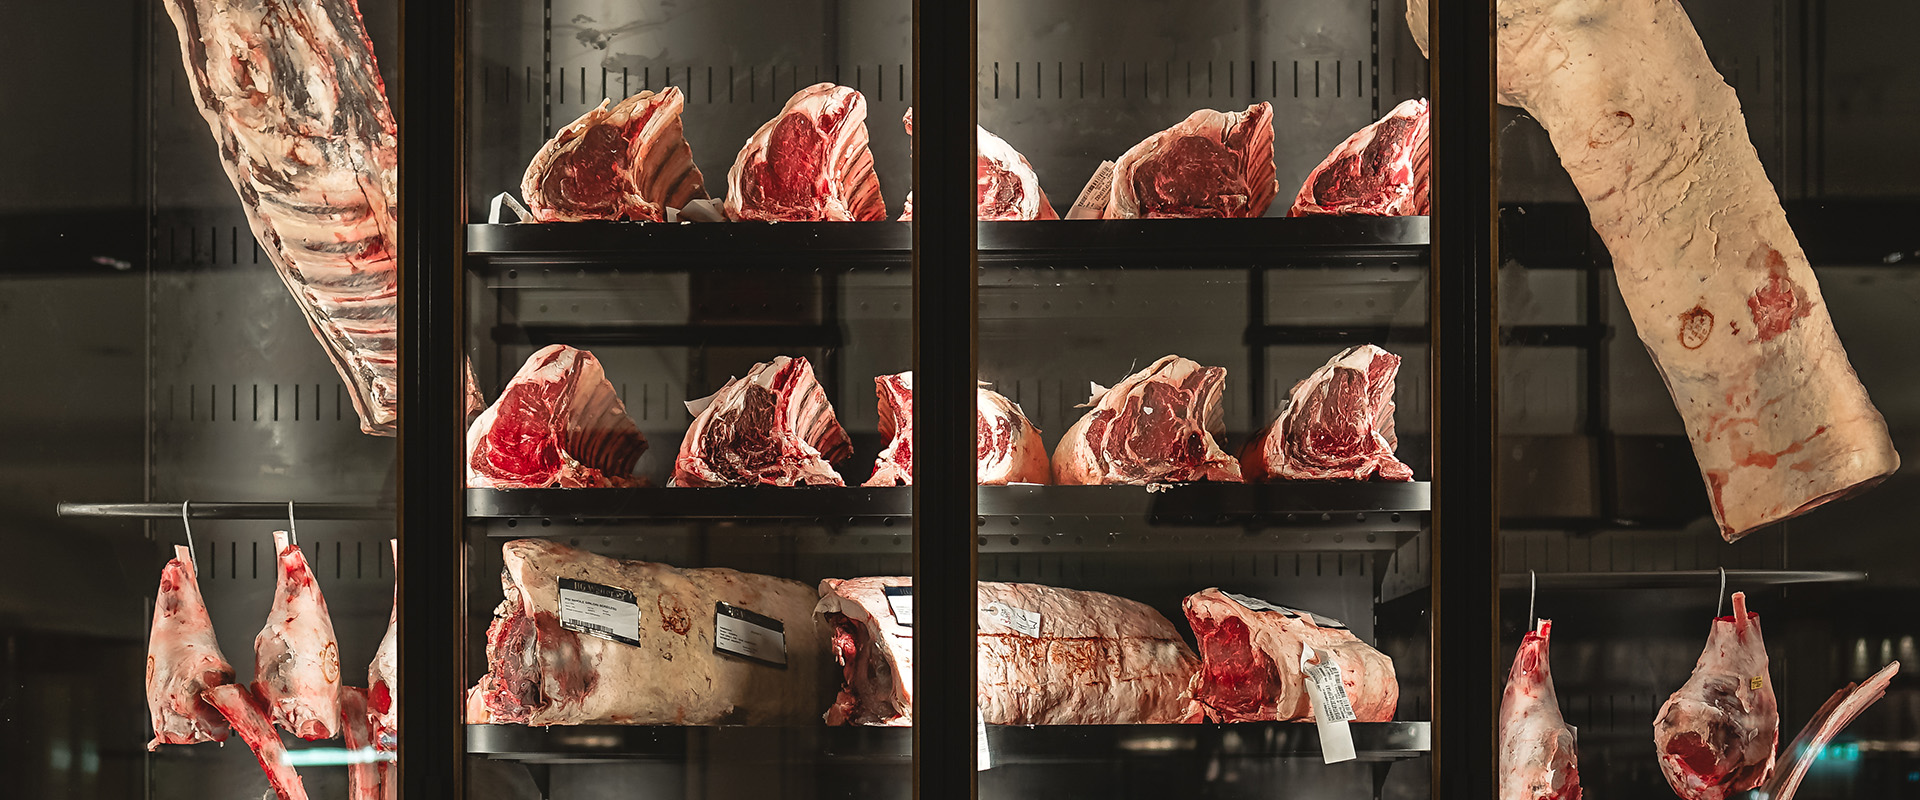 Shelf with butchered and cut meat